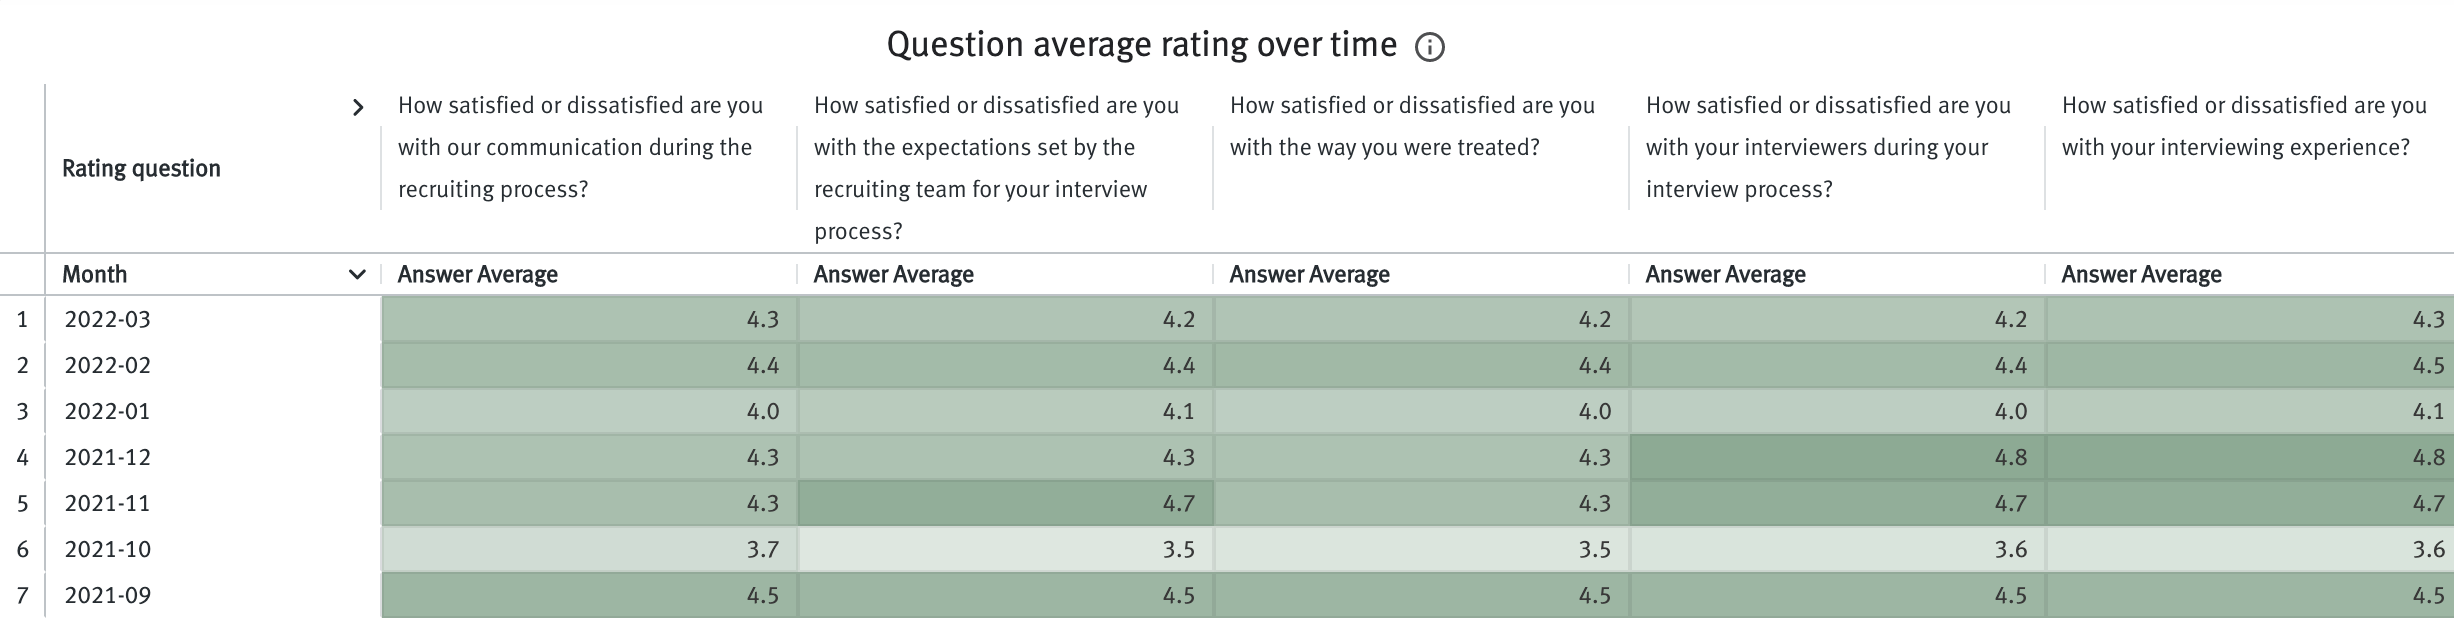 Question average rating over time table